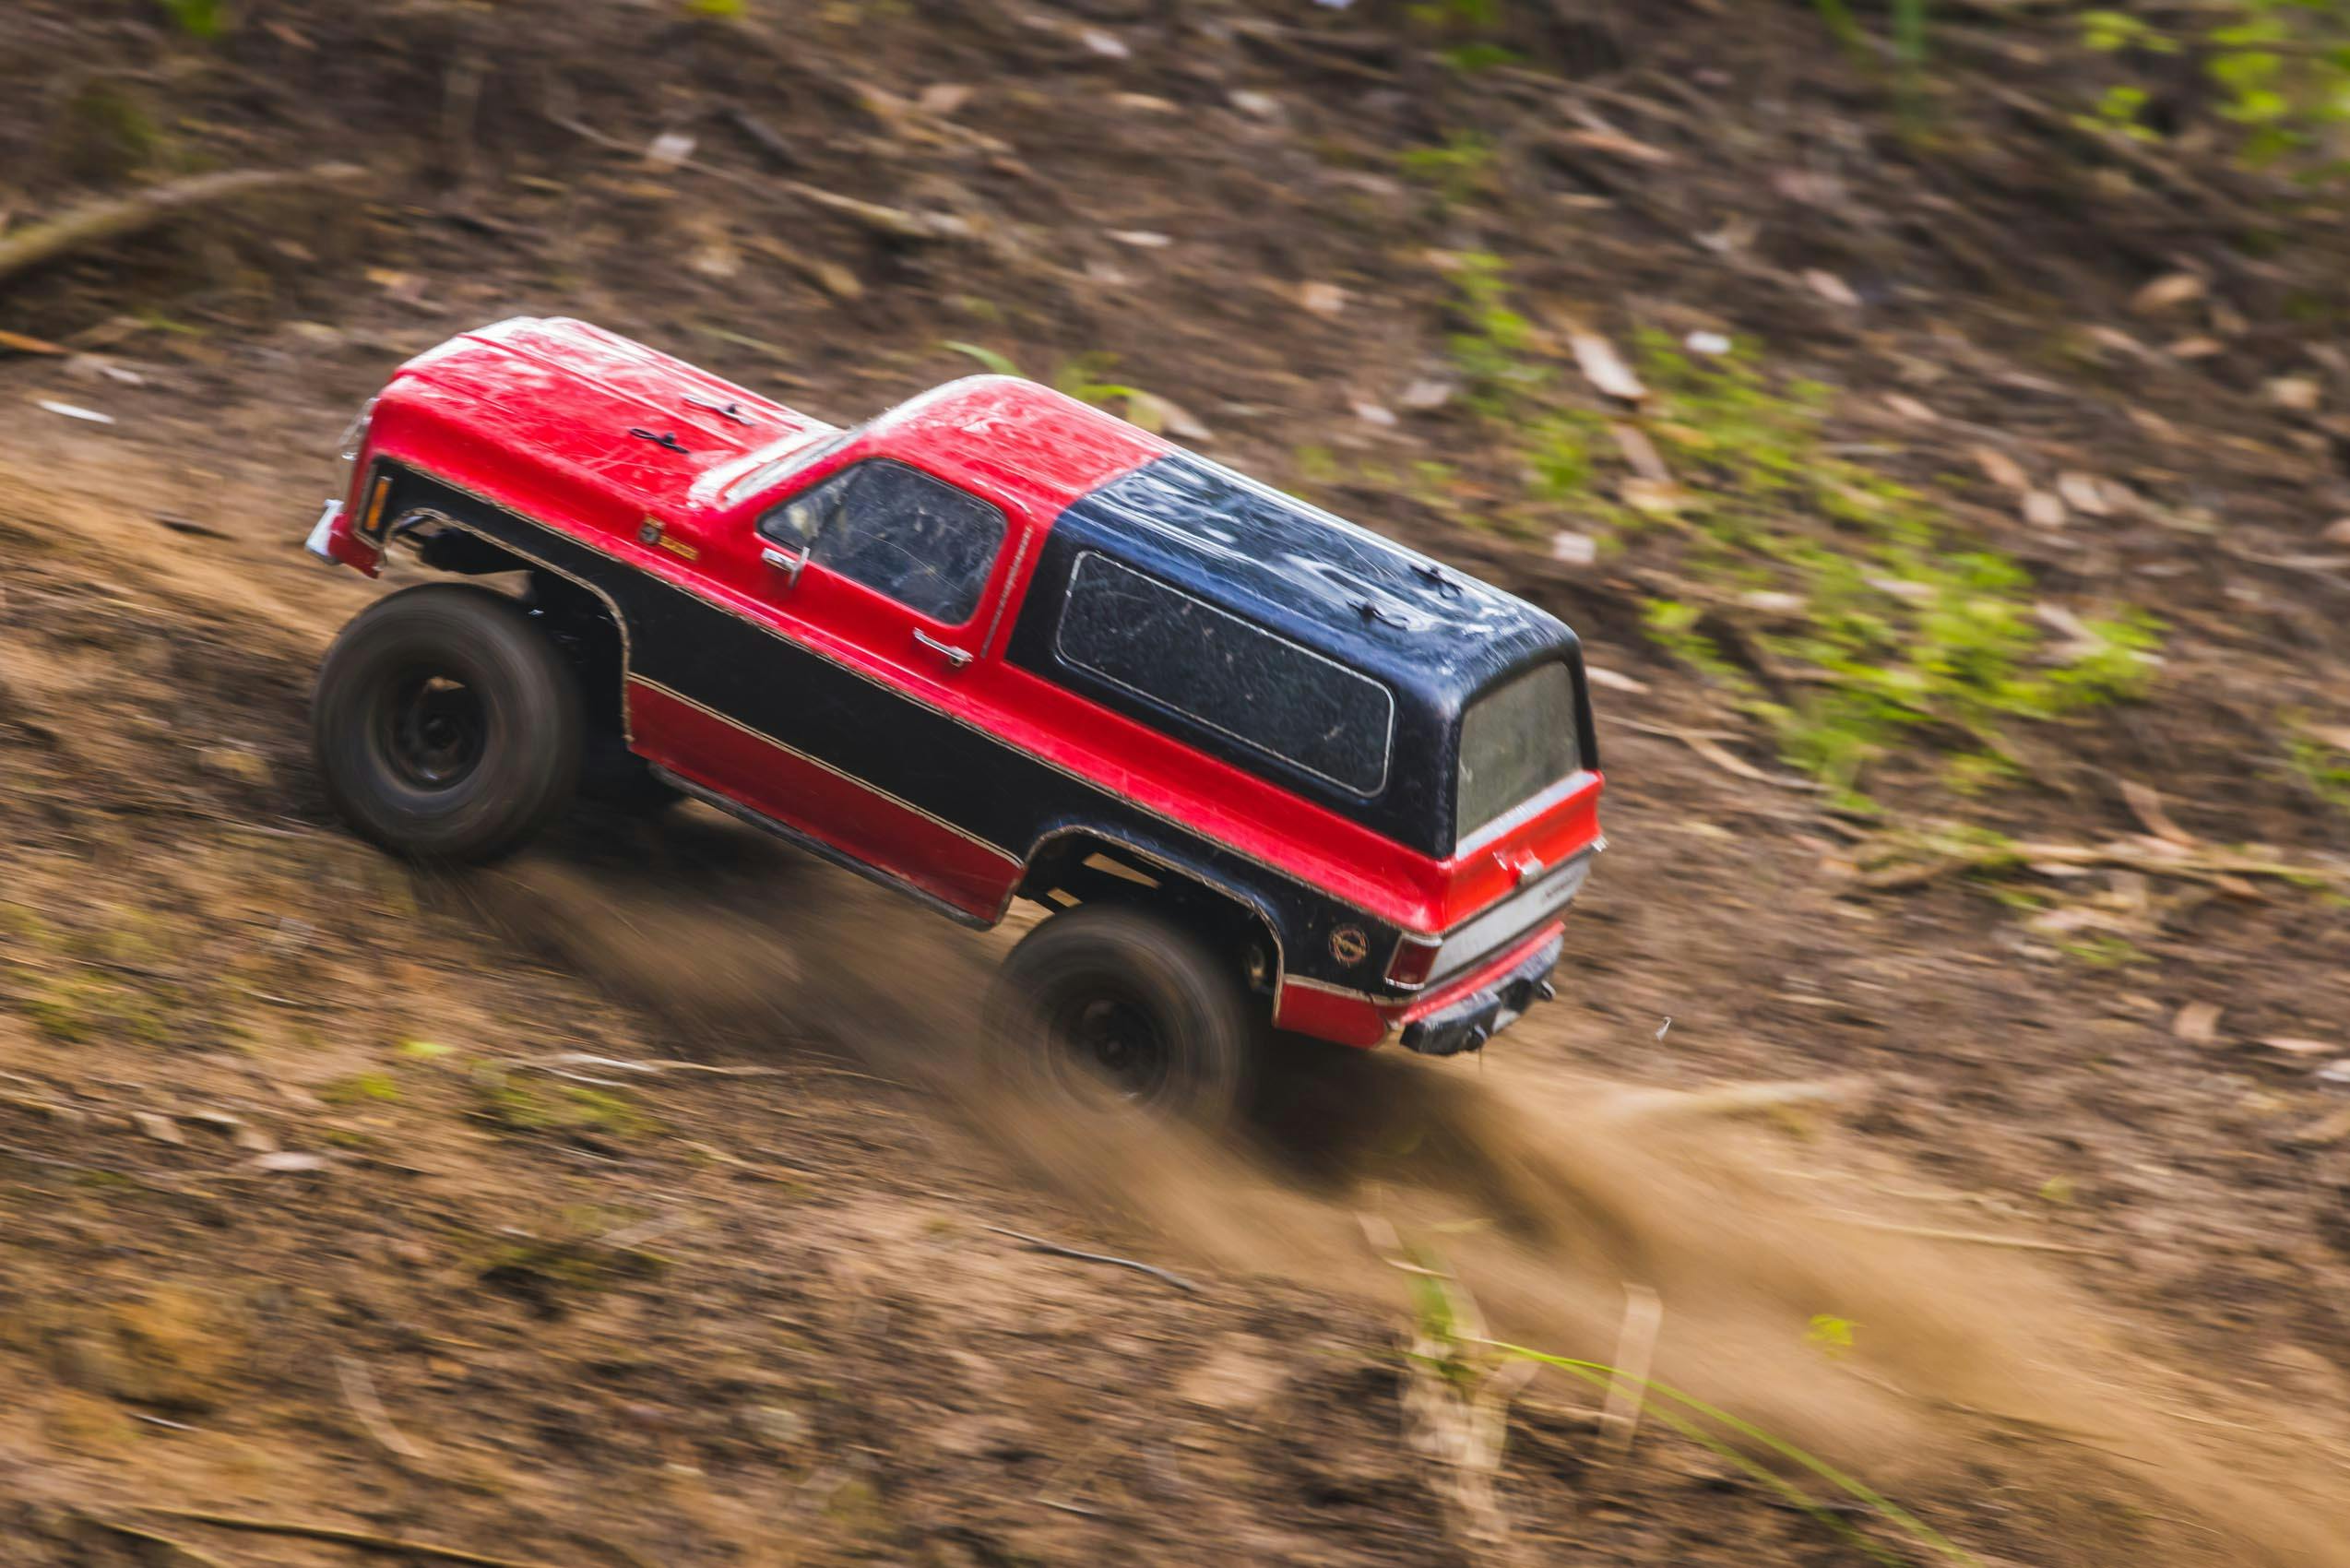 Scale RC Crawlers Chevy Blazer driving up hill